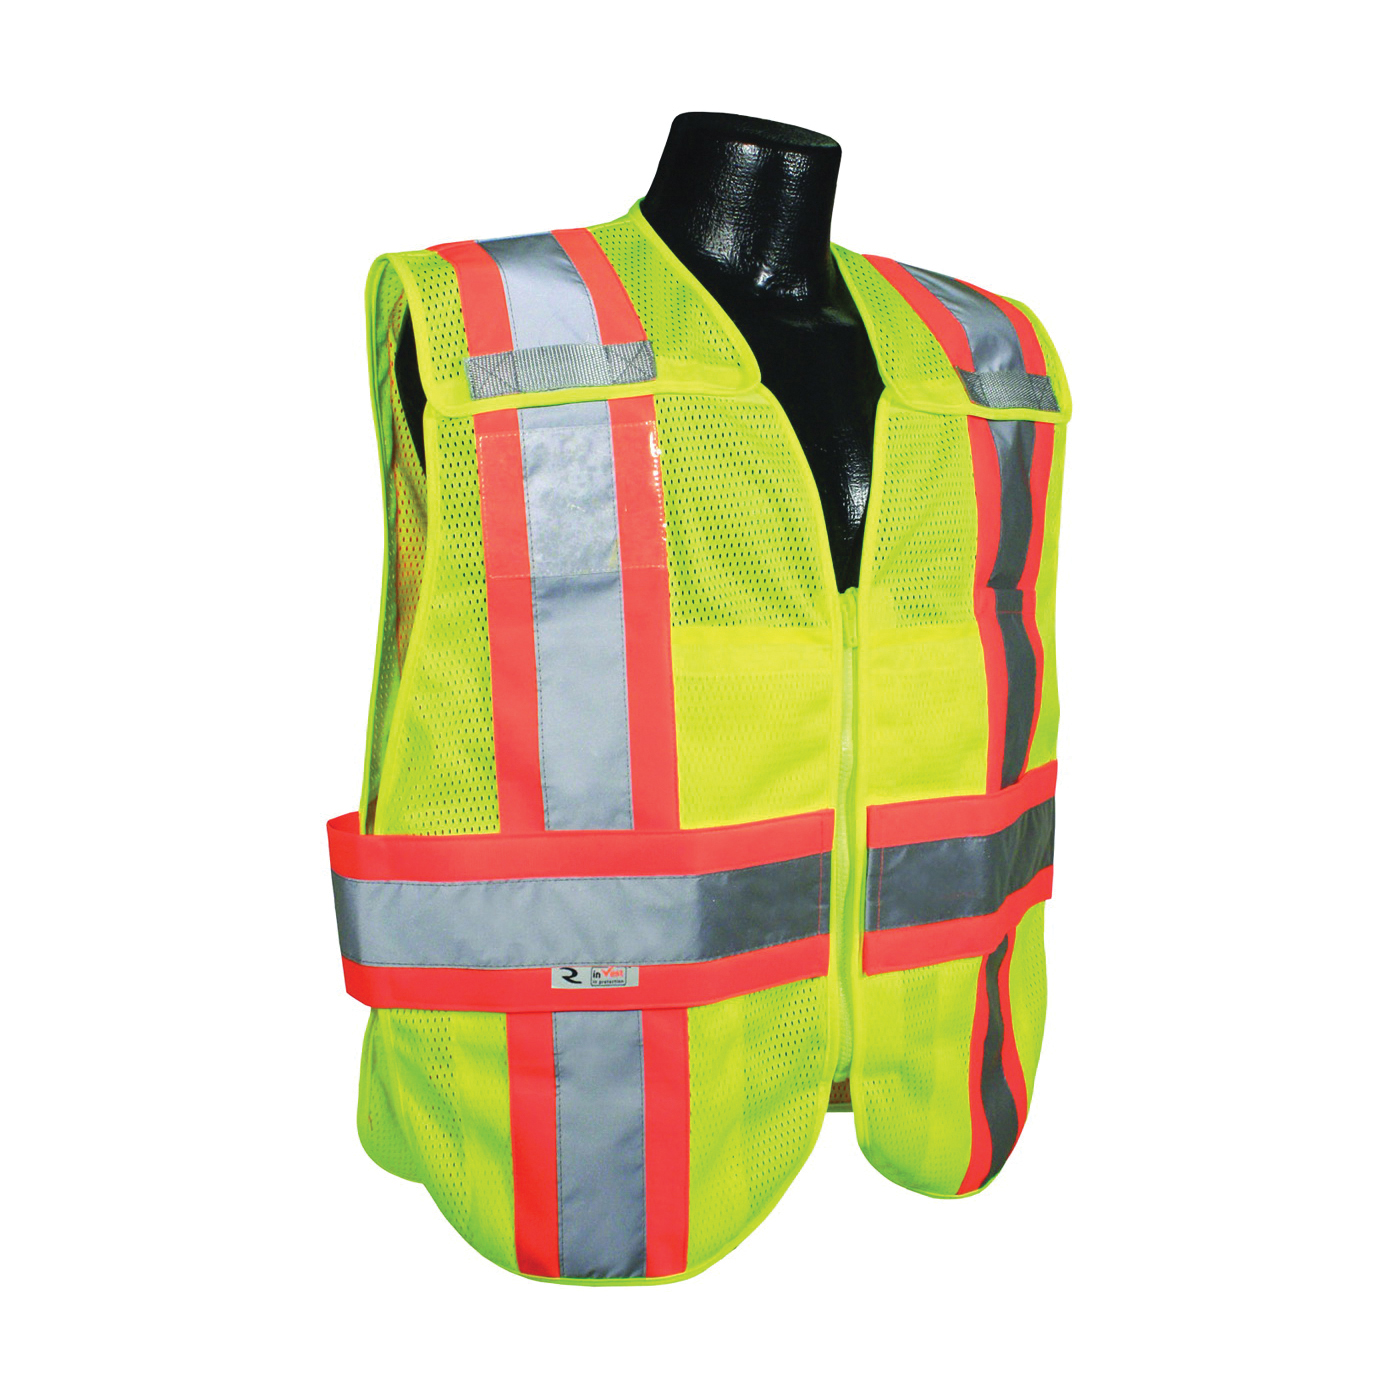 SV24-2ZGM-M/L Expandable Safety Vest, L/M, Polyester, Green/Silver, Zip-N-Rip Closure